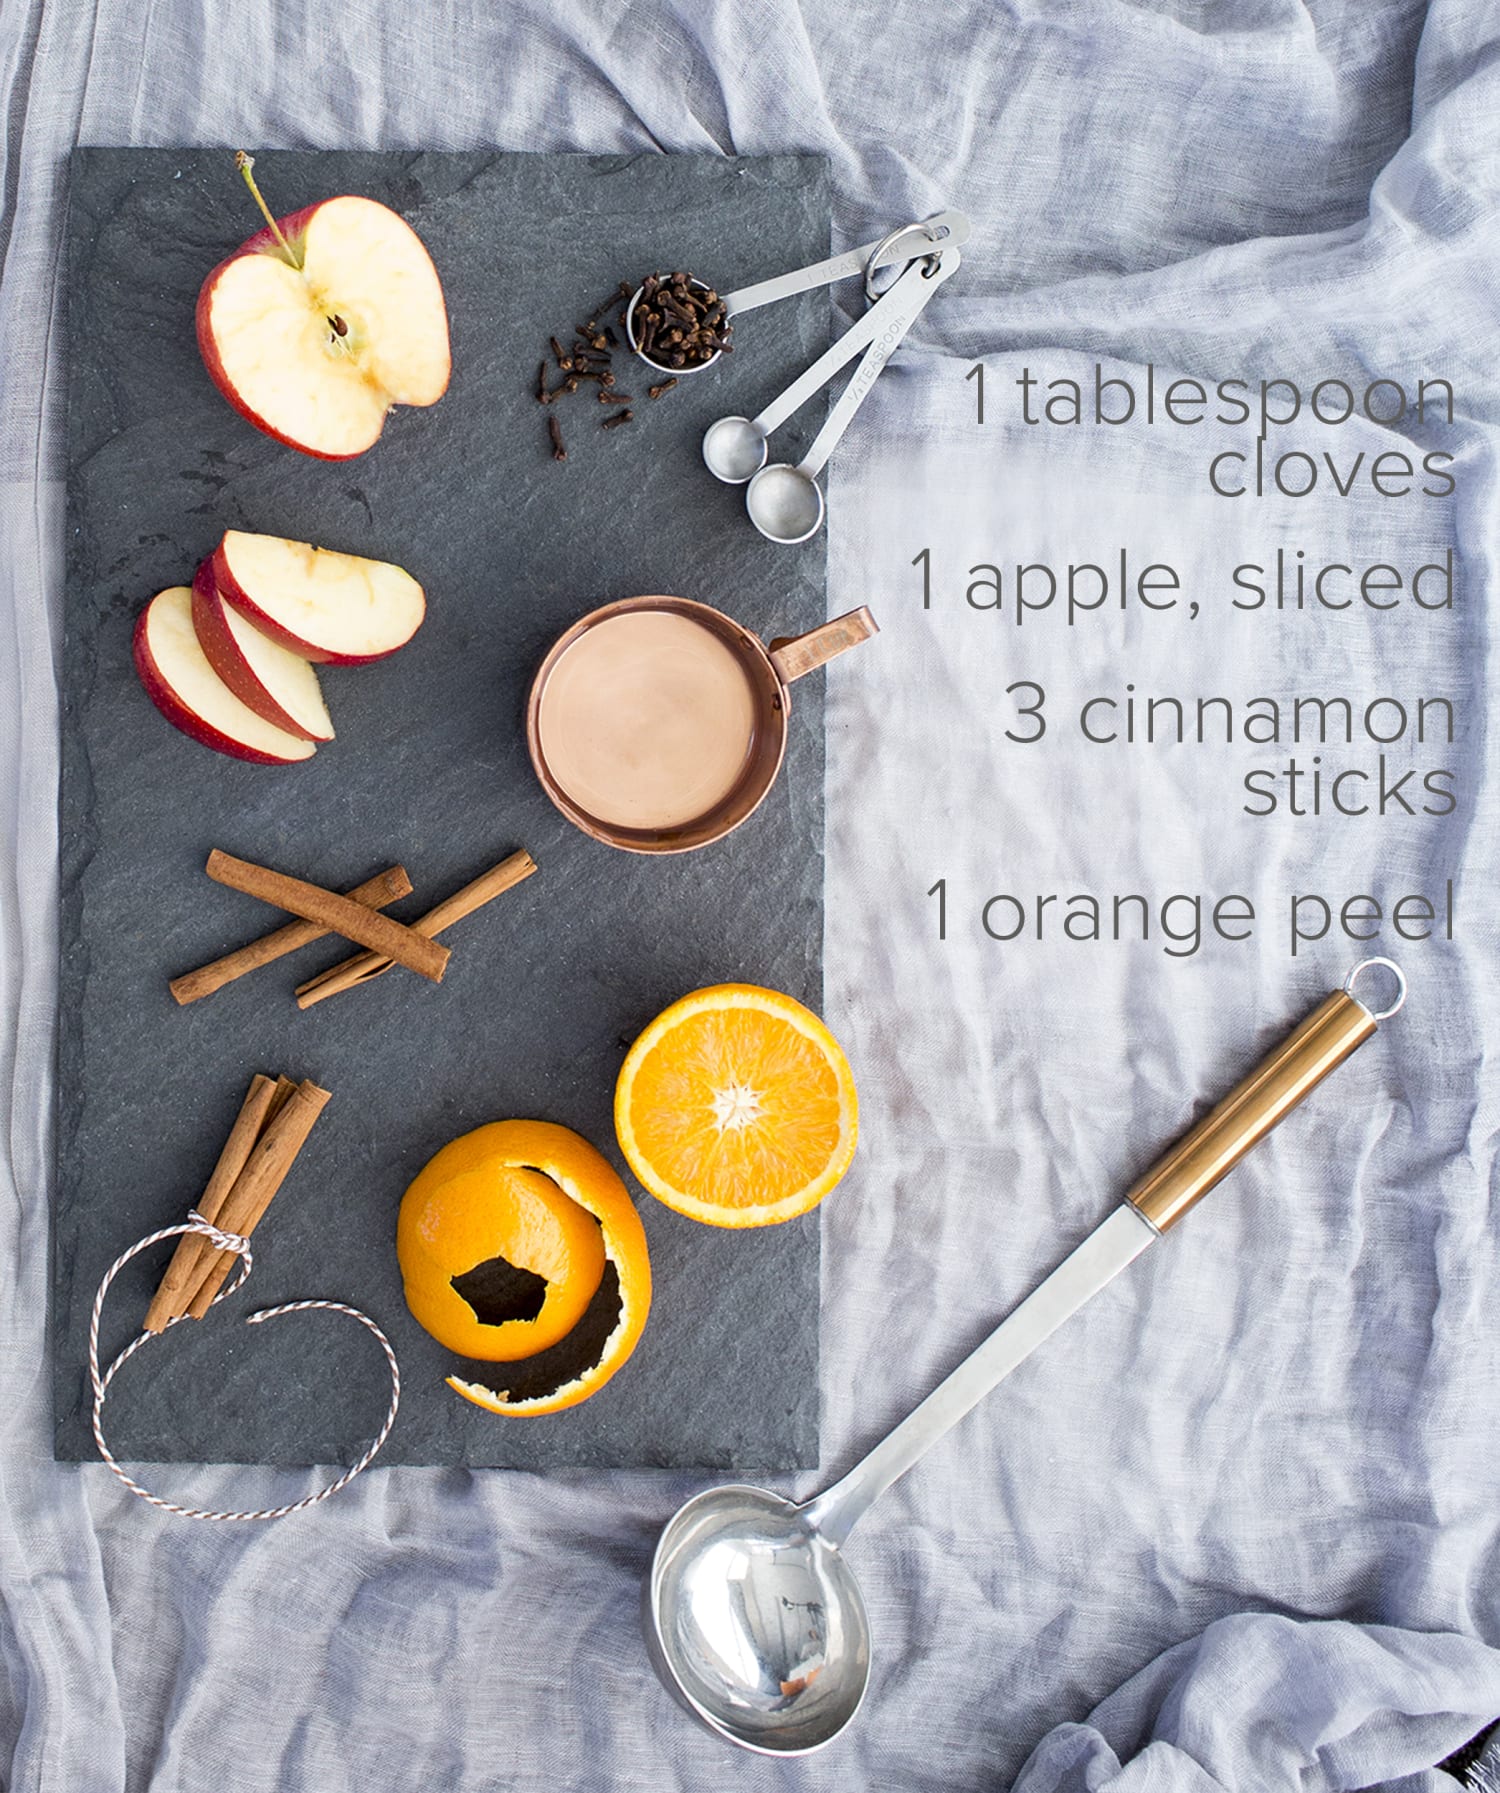 How to Make Potpourri for Fall